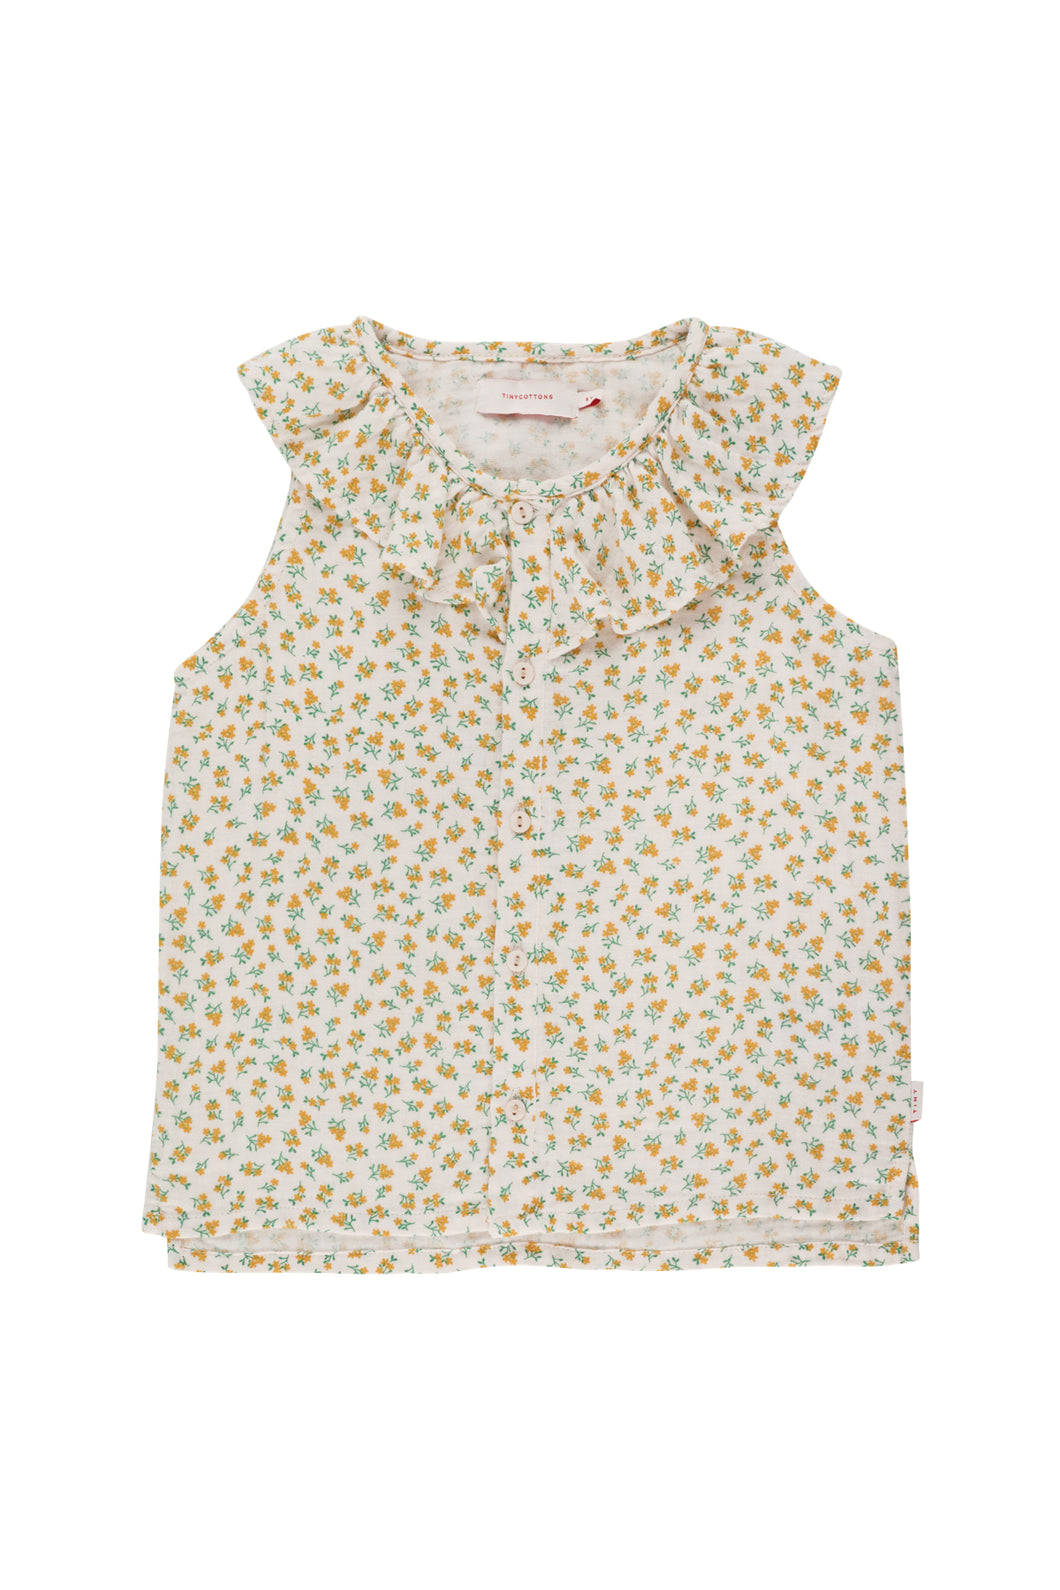 Small Flowers Blouse